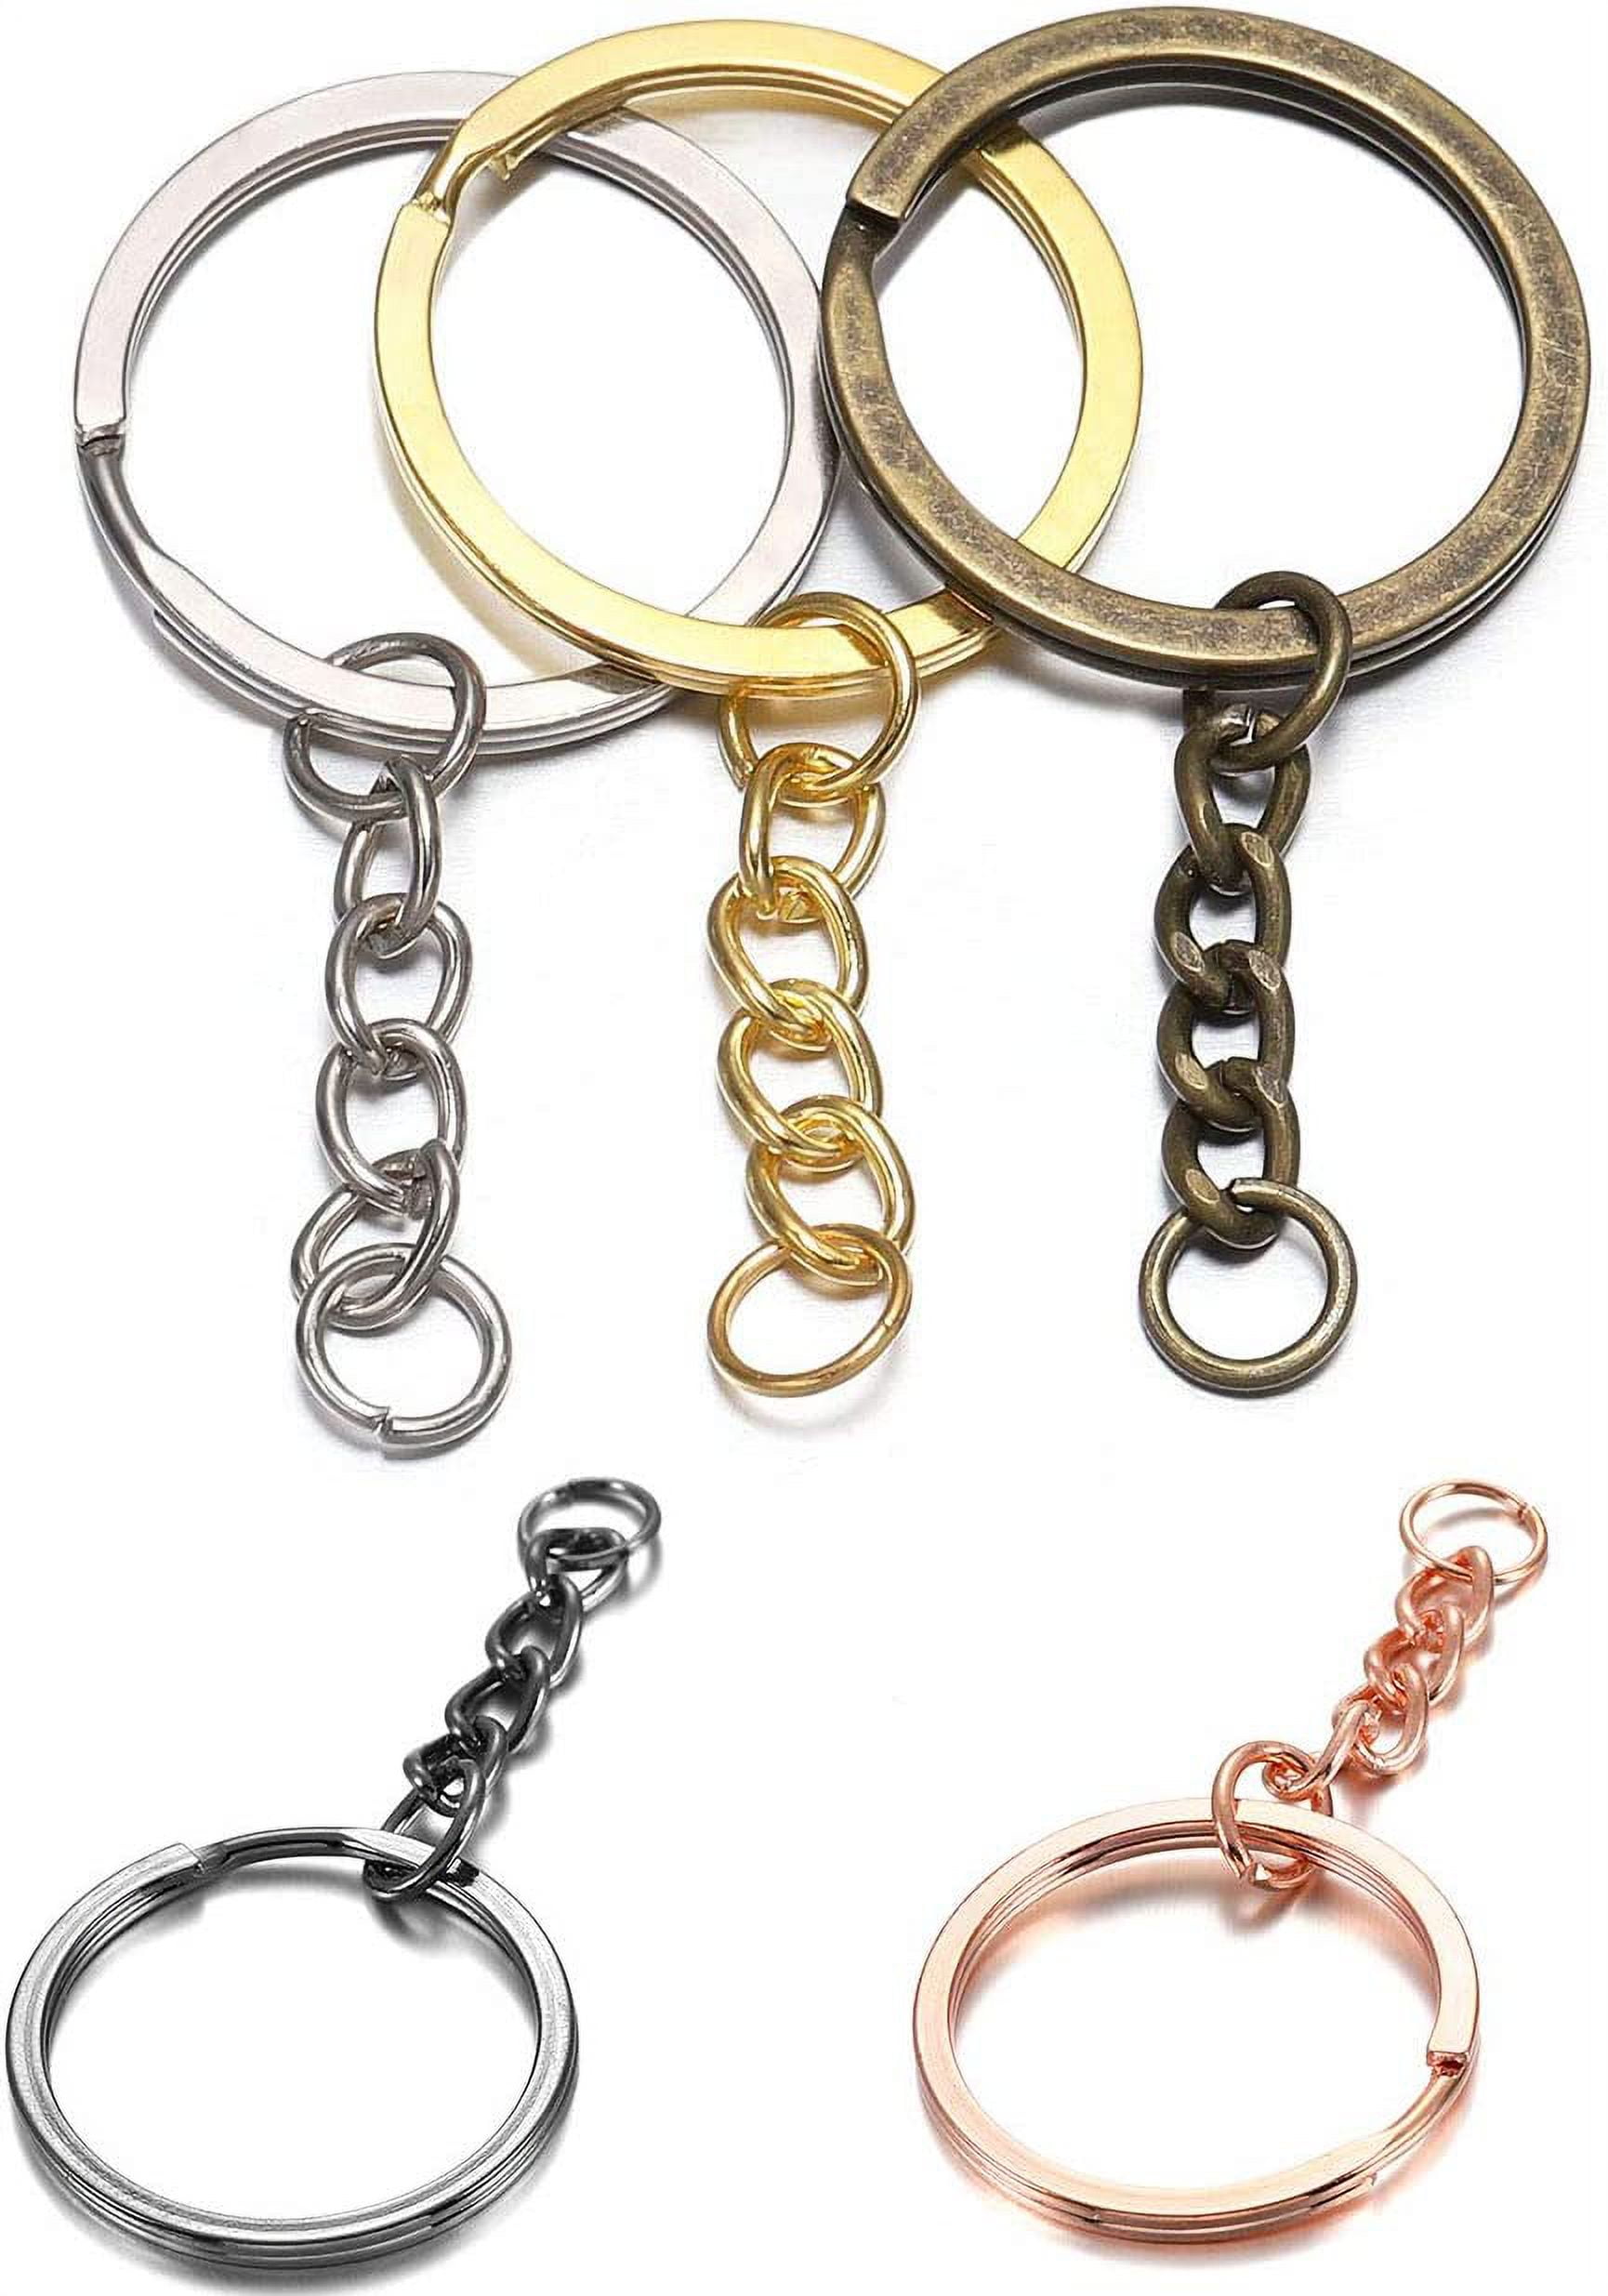 Shop for and Buy 9mm (23/64 Inch) Diameter Small Split Keyring